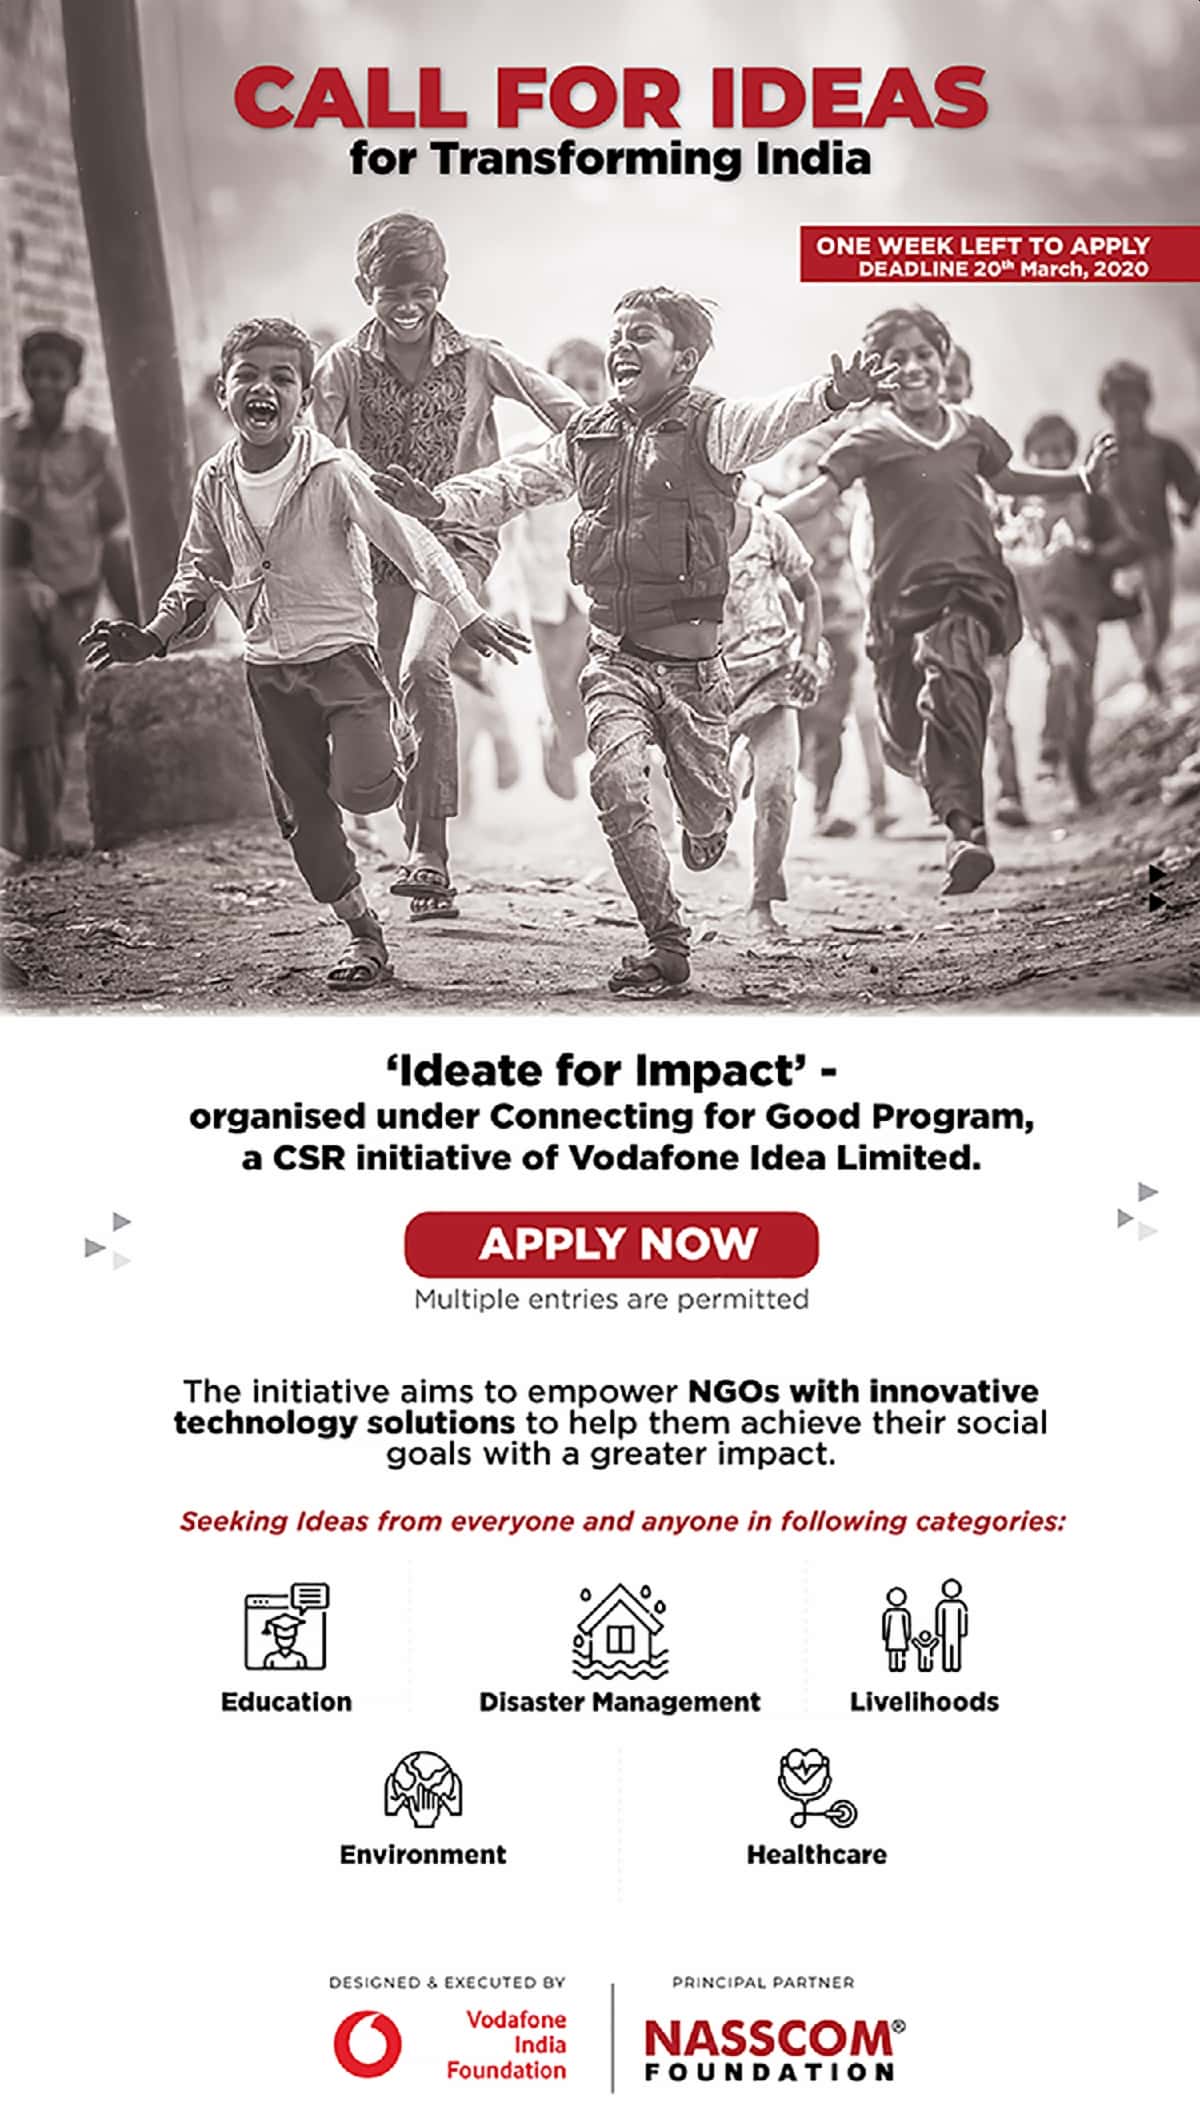 Ideate for Impact